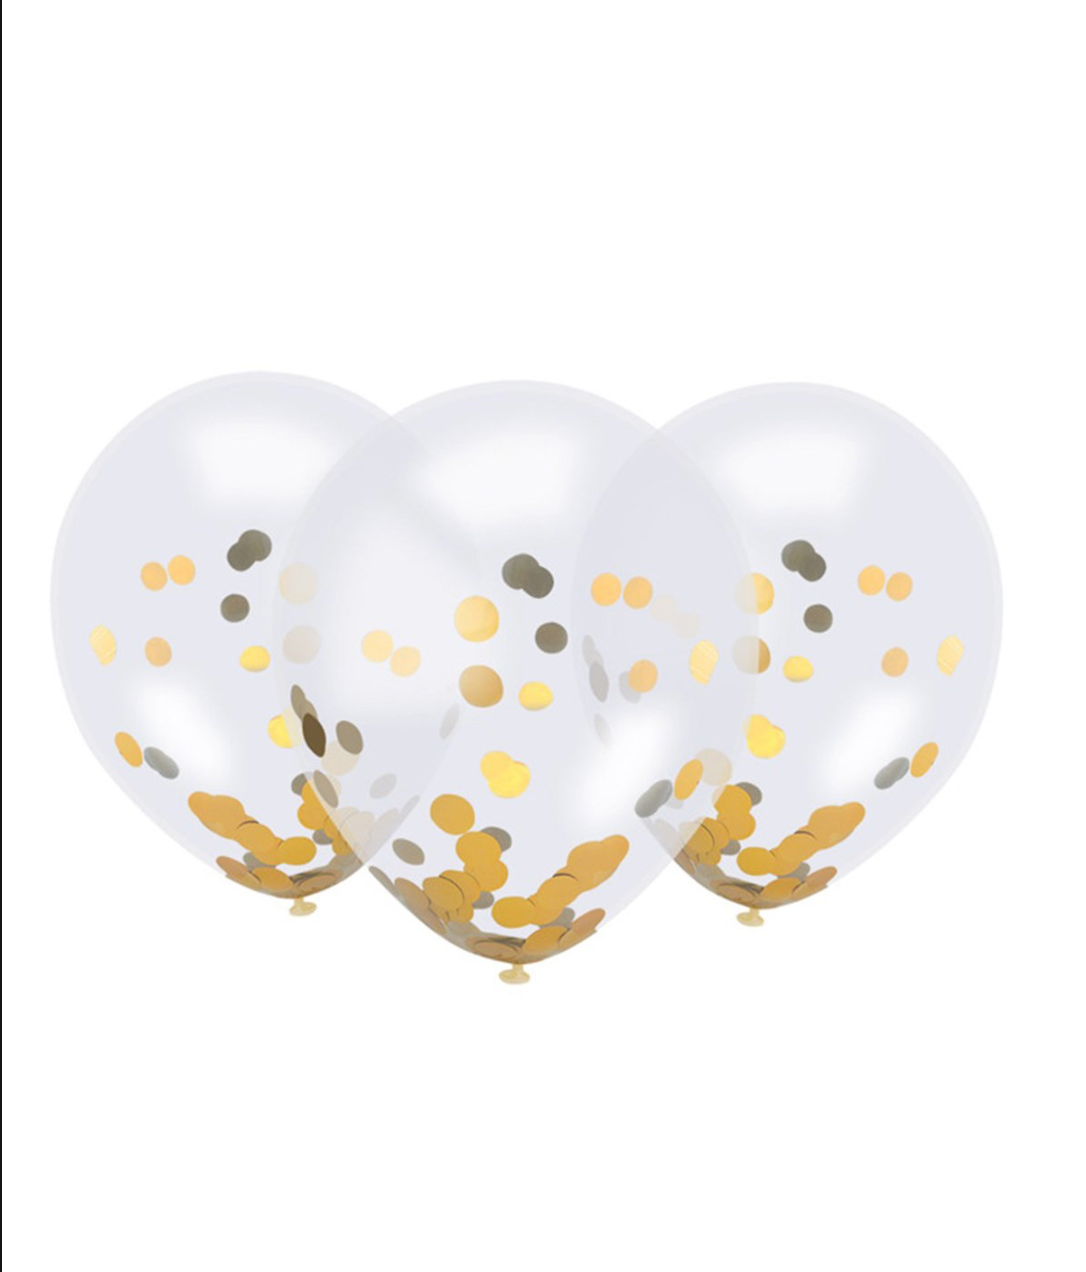 12 inch Gold Confetti Balloons Package of 6